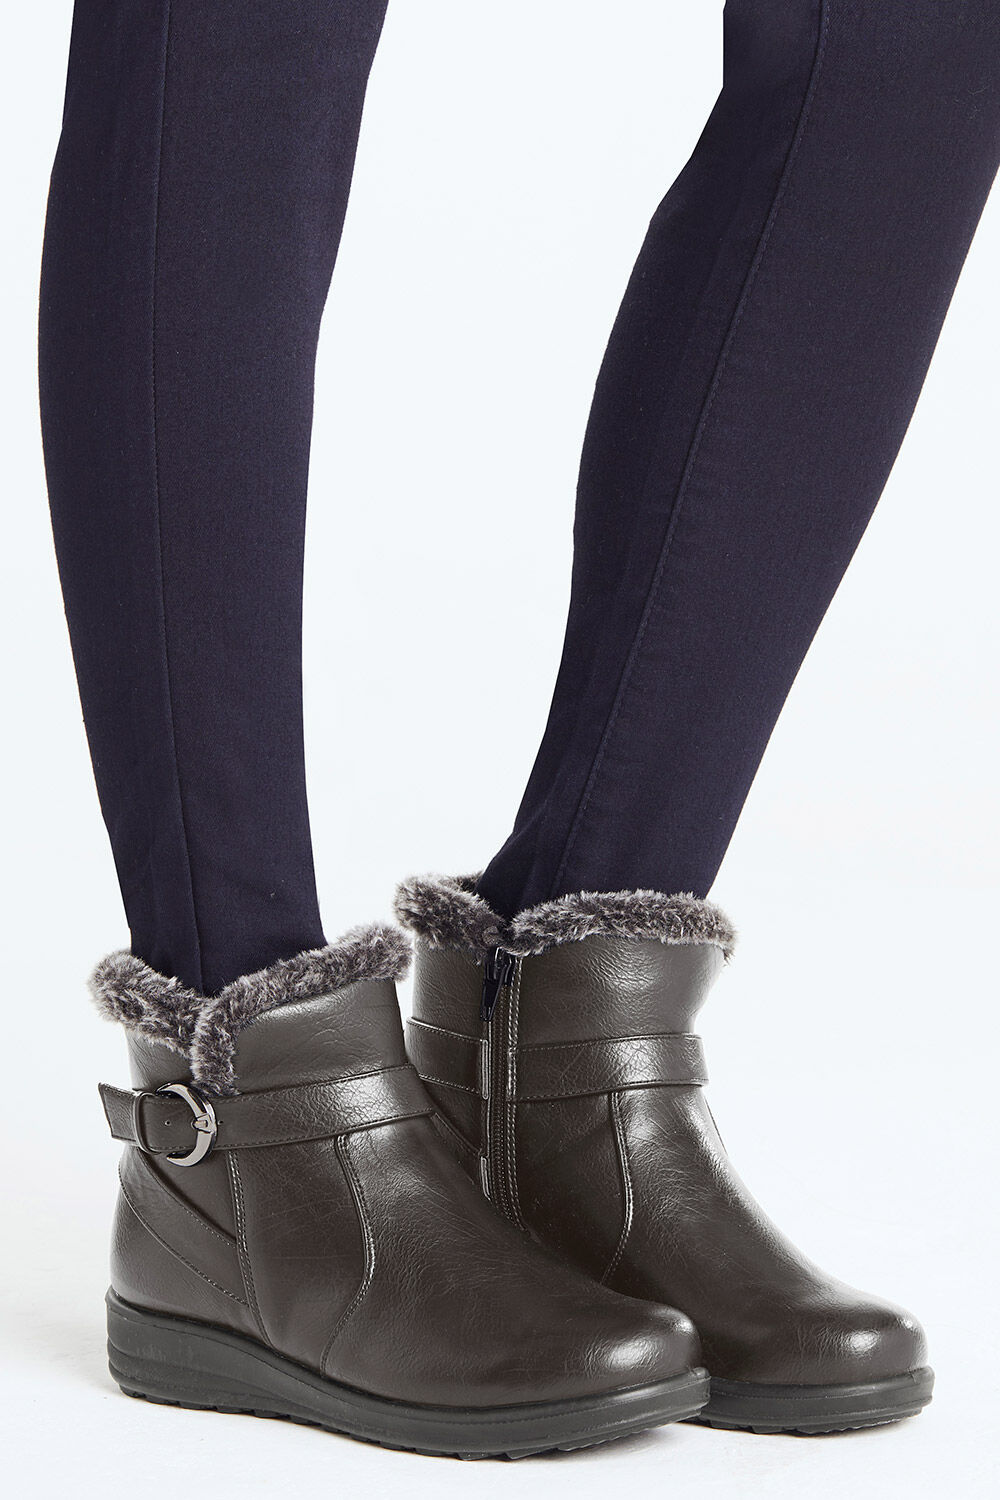 cushion walk ankle boots